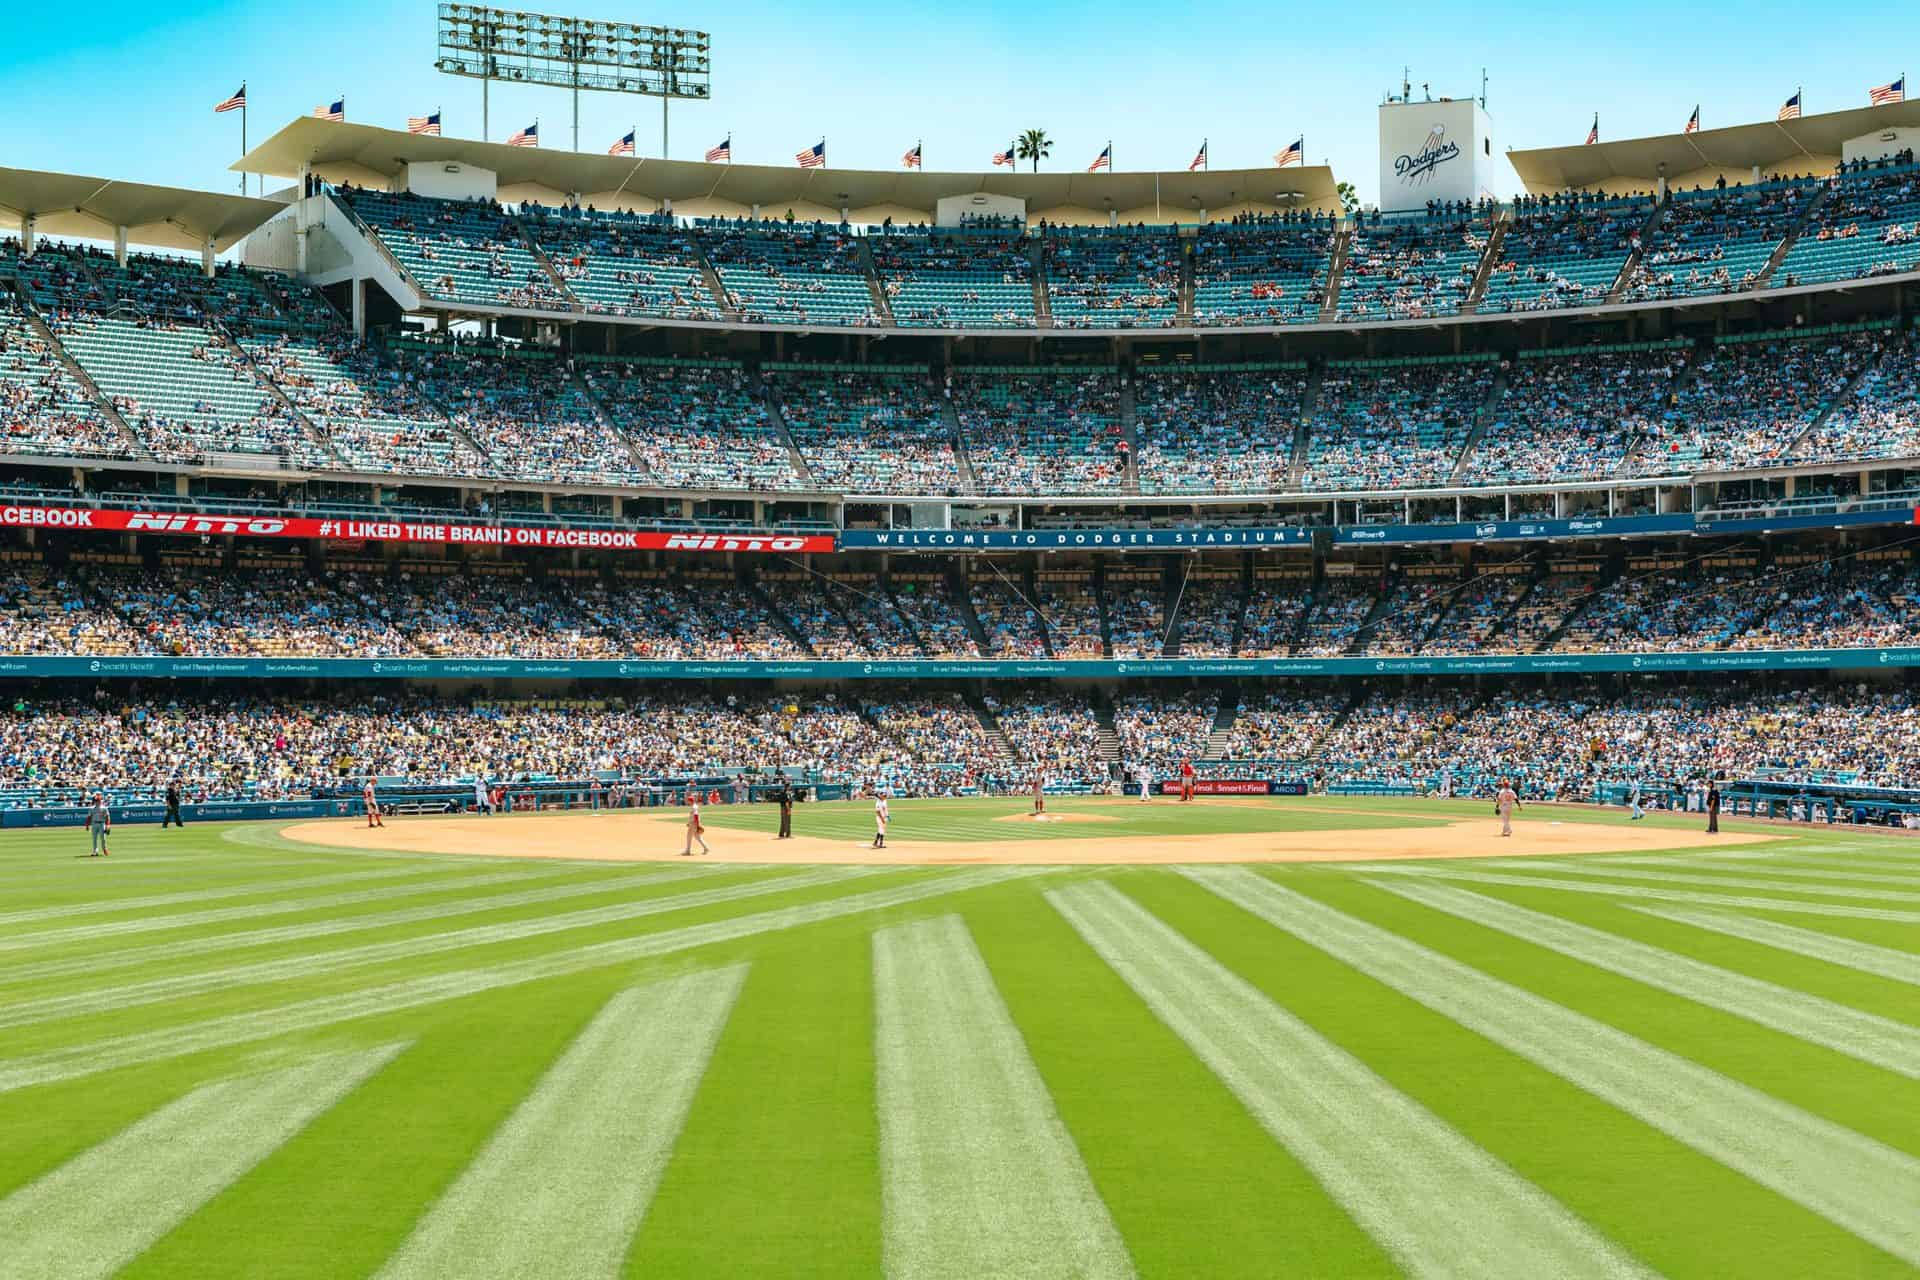 View of a Baseball stadium from the outfield